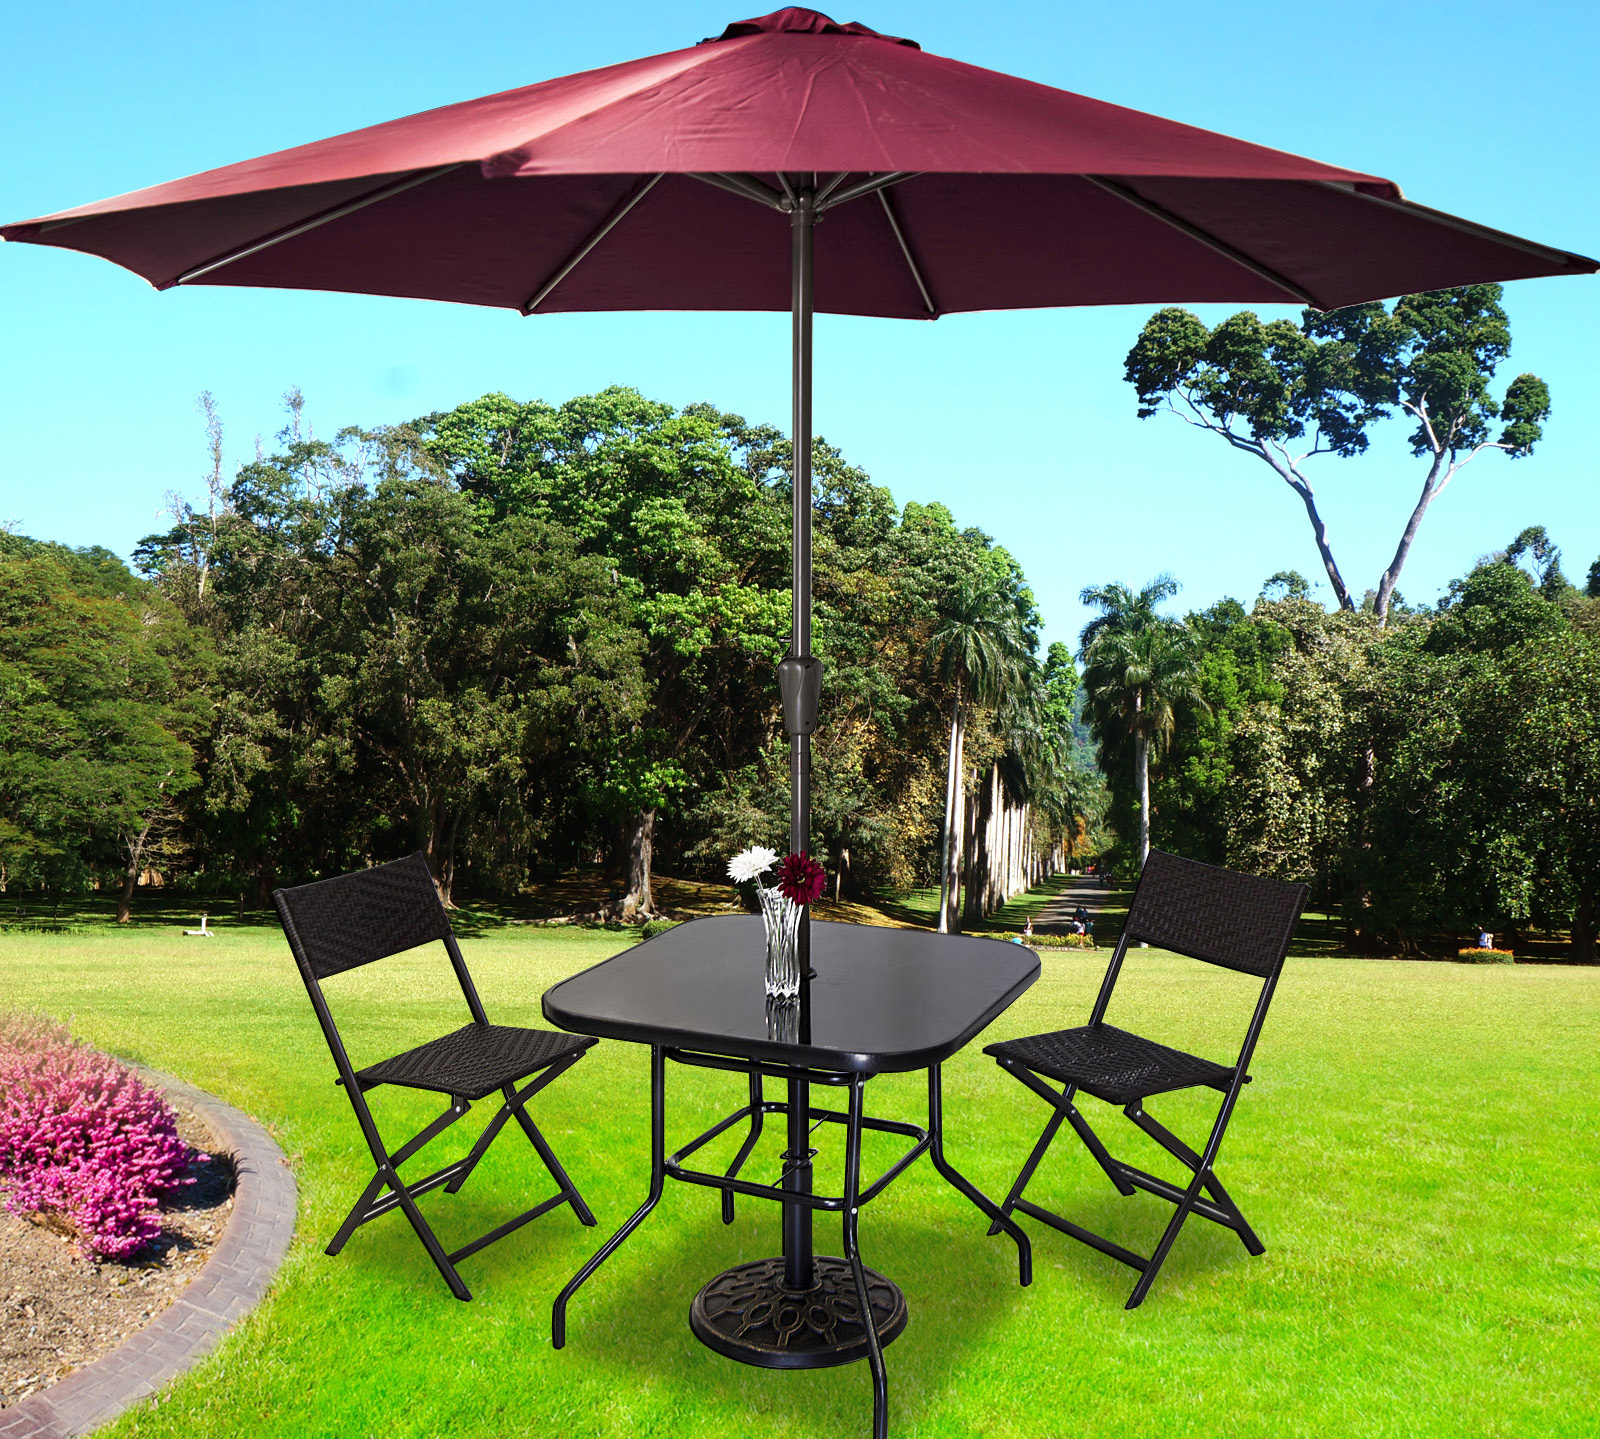 Alfresco 5PC Outdoor Setting (Maroon Umbrella & Stand, 2 Rattan Chairs, Square Table)